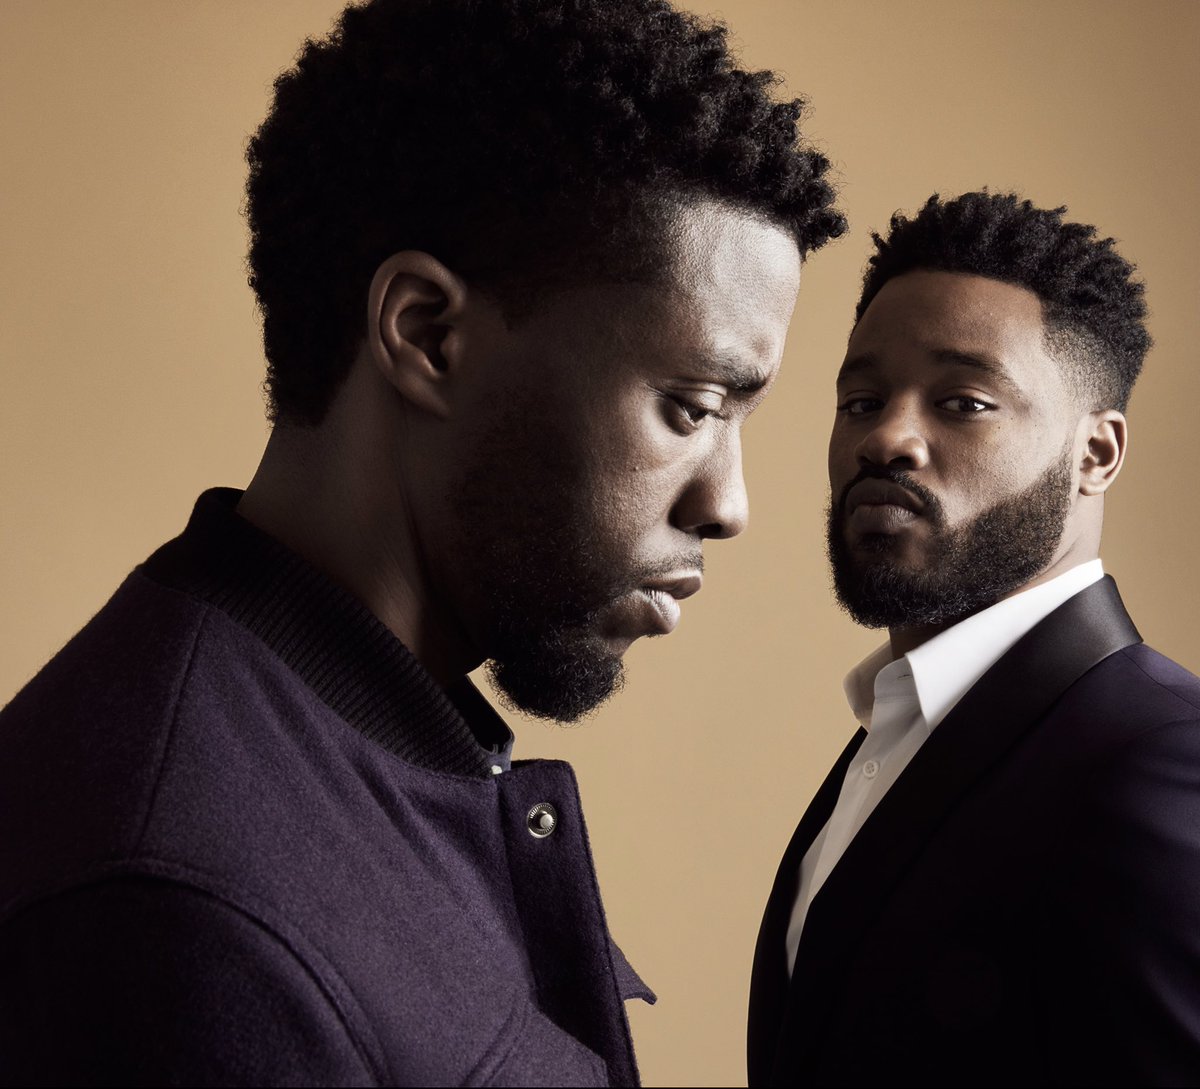 Director Ryan Coogler discusses making ‘Black Panther 2’ without Chadwick Boseman.

“I know Chad wouldn't have wanted us to stop...truthfully. I'd feel him yelling at me, like, 'What are you doing?' So you keep going.”

(Source: @THR) https://t.co/tKpGx6gsiB